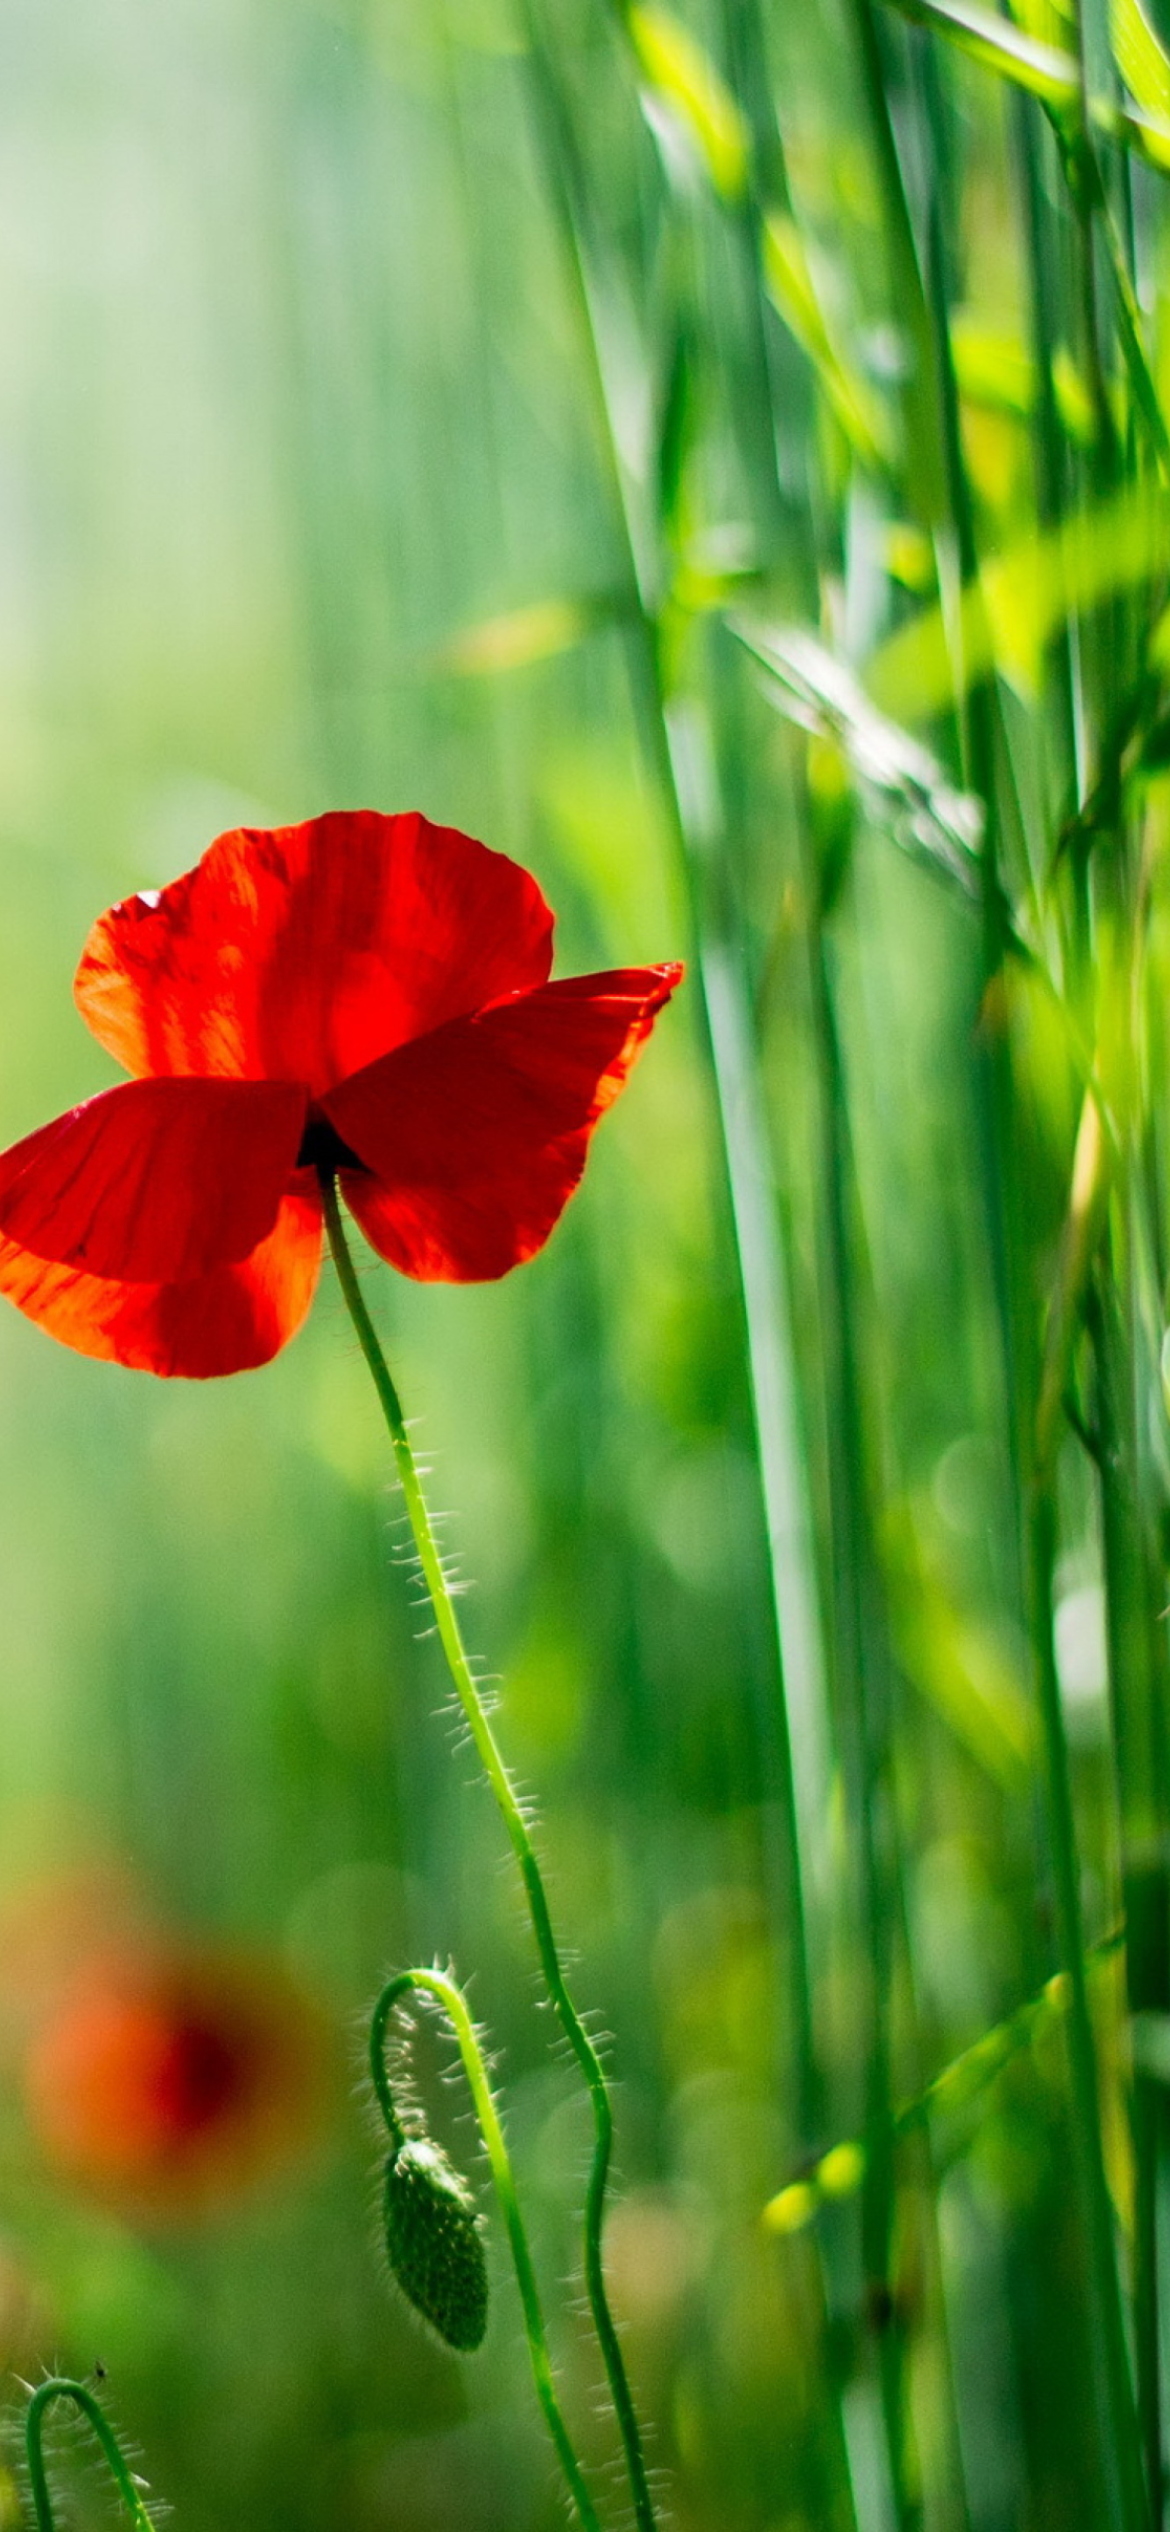 Red Poppy And Green Grass wallpaper 1170x2532